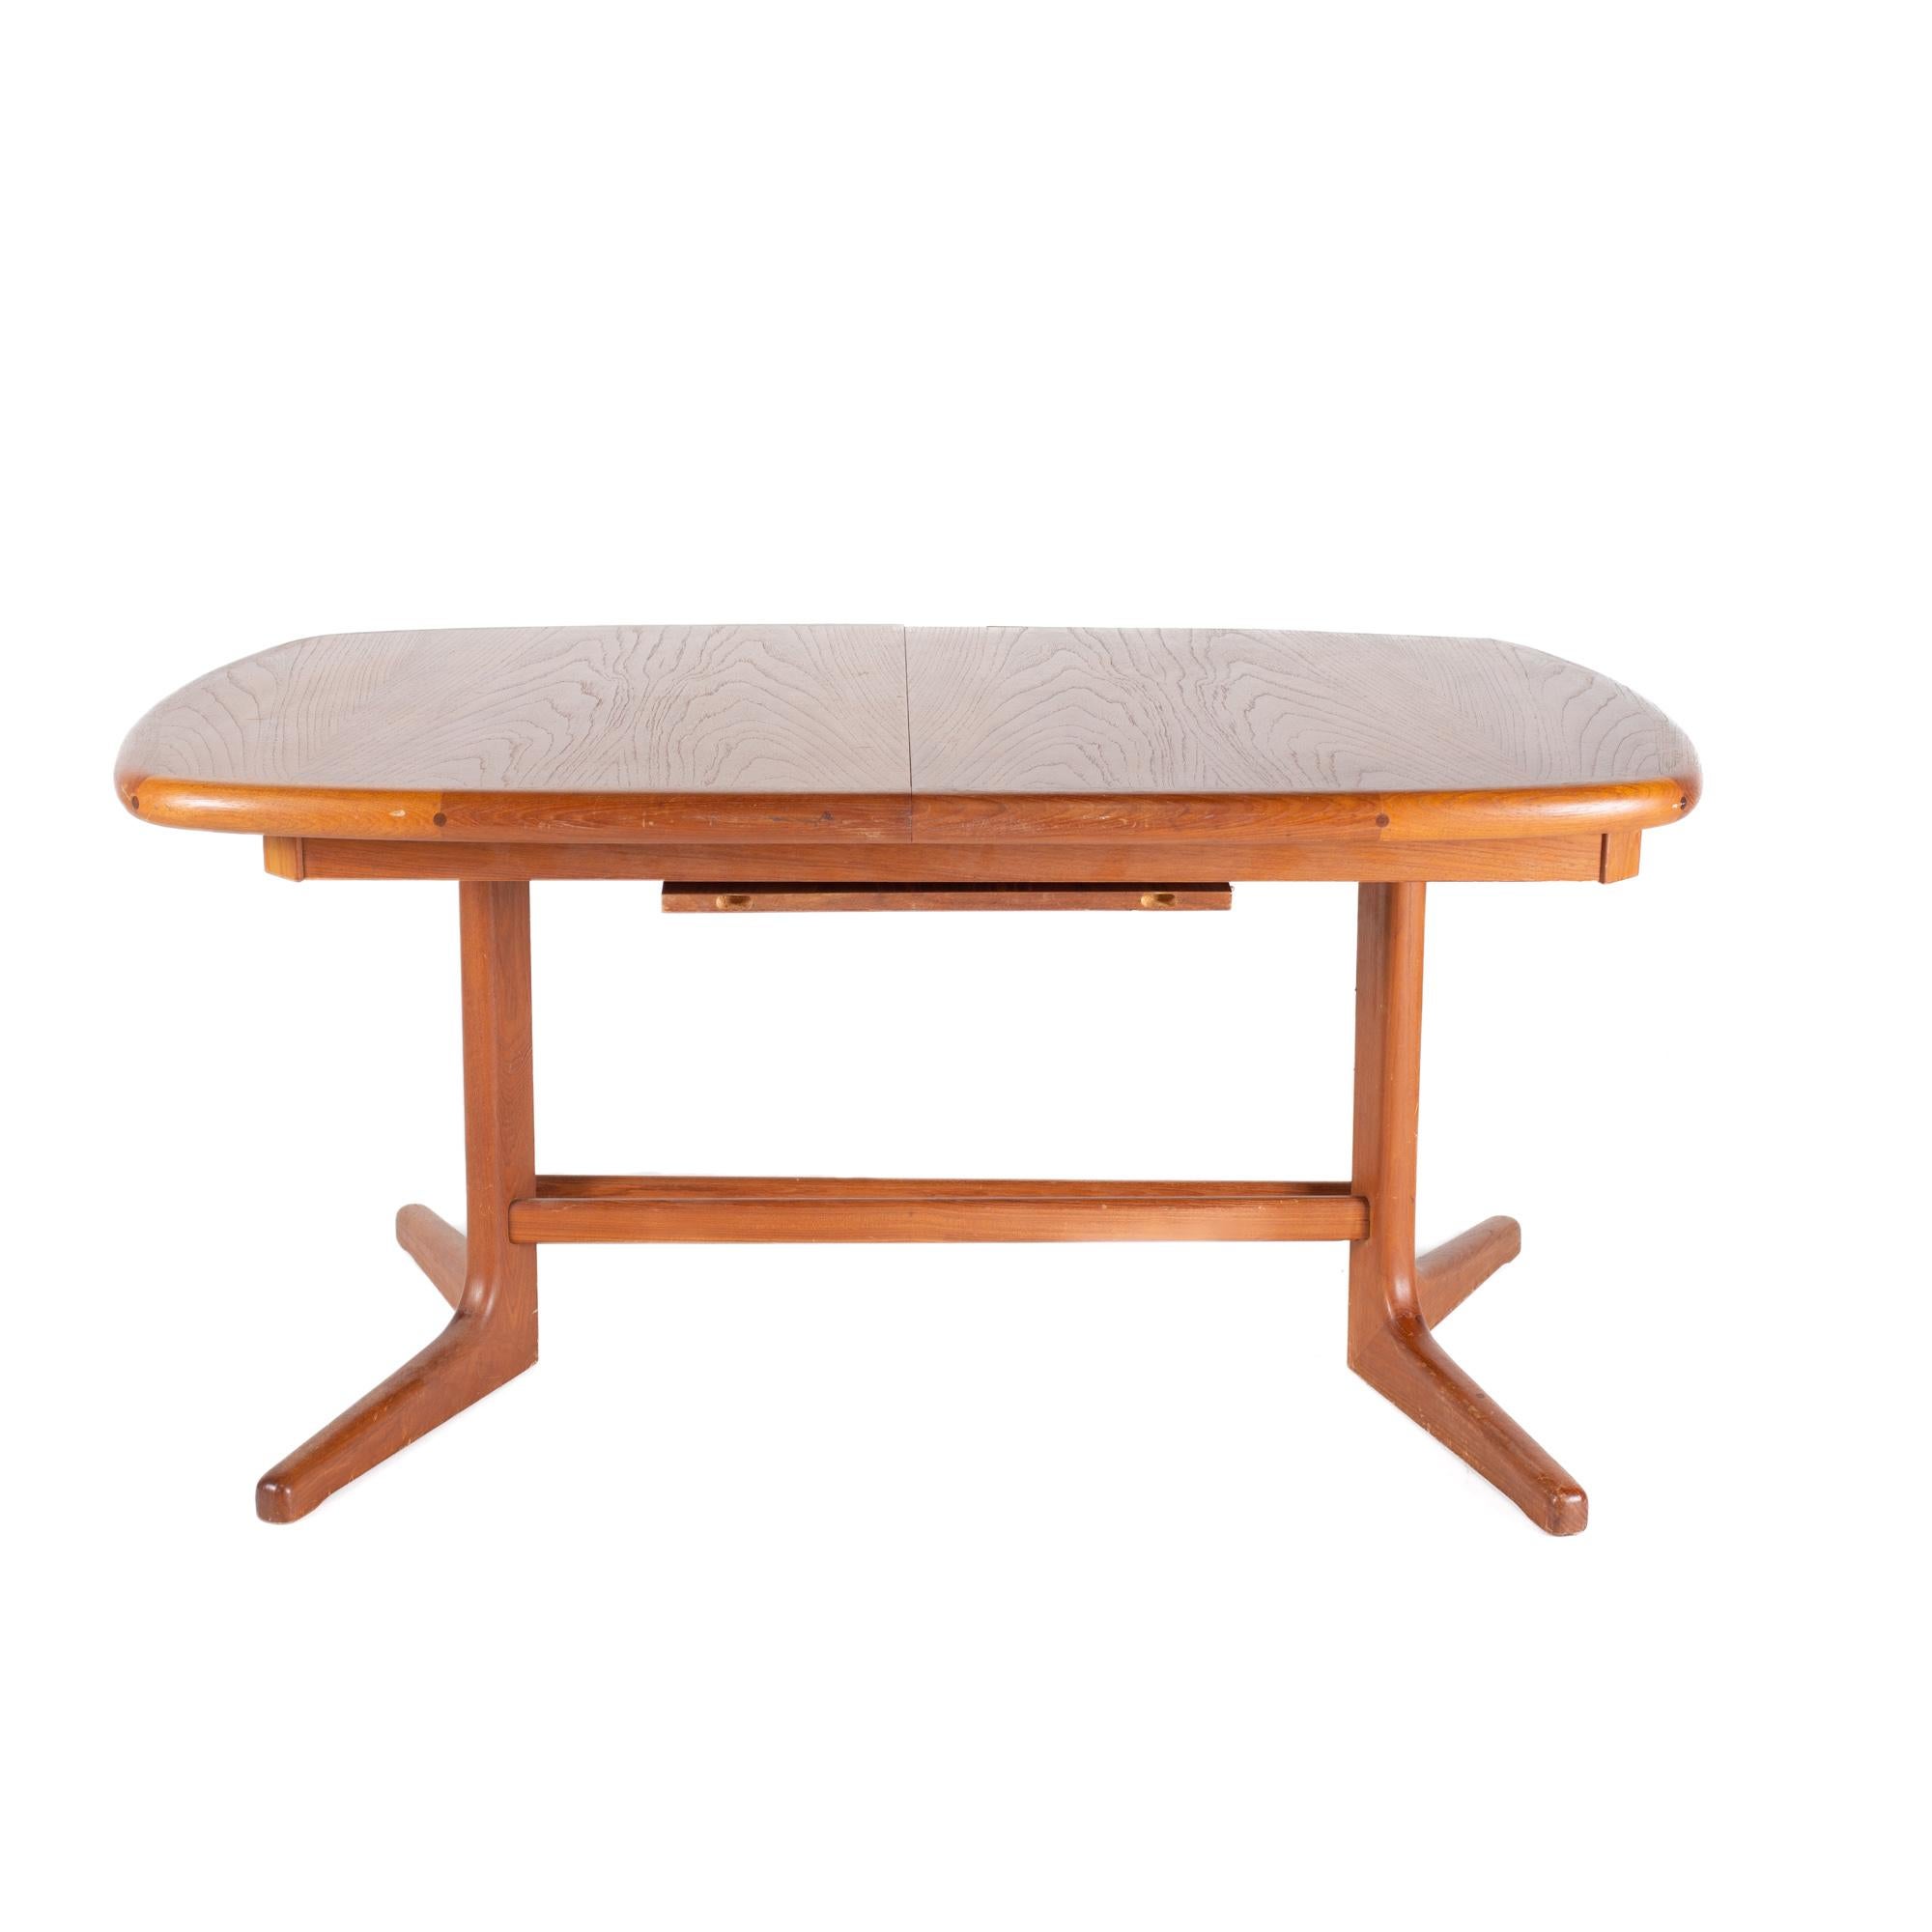 Dyrlund Style Mid Century Teak Hidden Leaf Dining Table

The table measures: 58 wide x 38 deep x 28 high, with a chair clearance of 24 inches; the leaf is 20 inches wide, making a maximum table width of 78 inches when the leaf is used

All